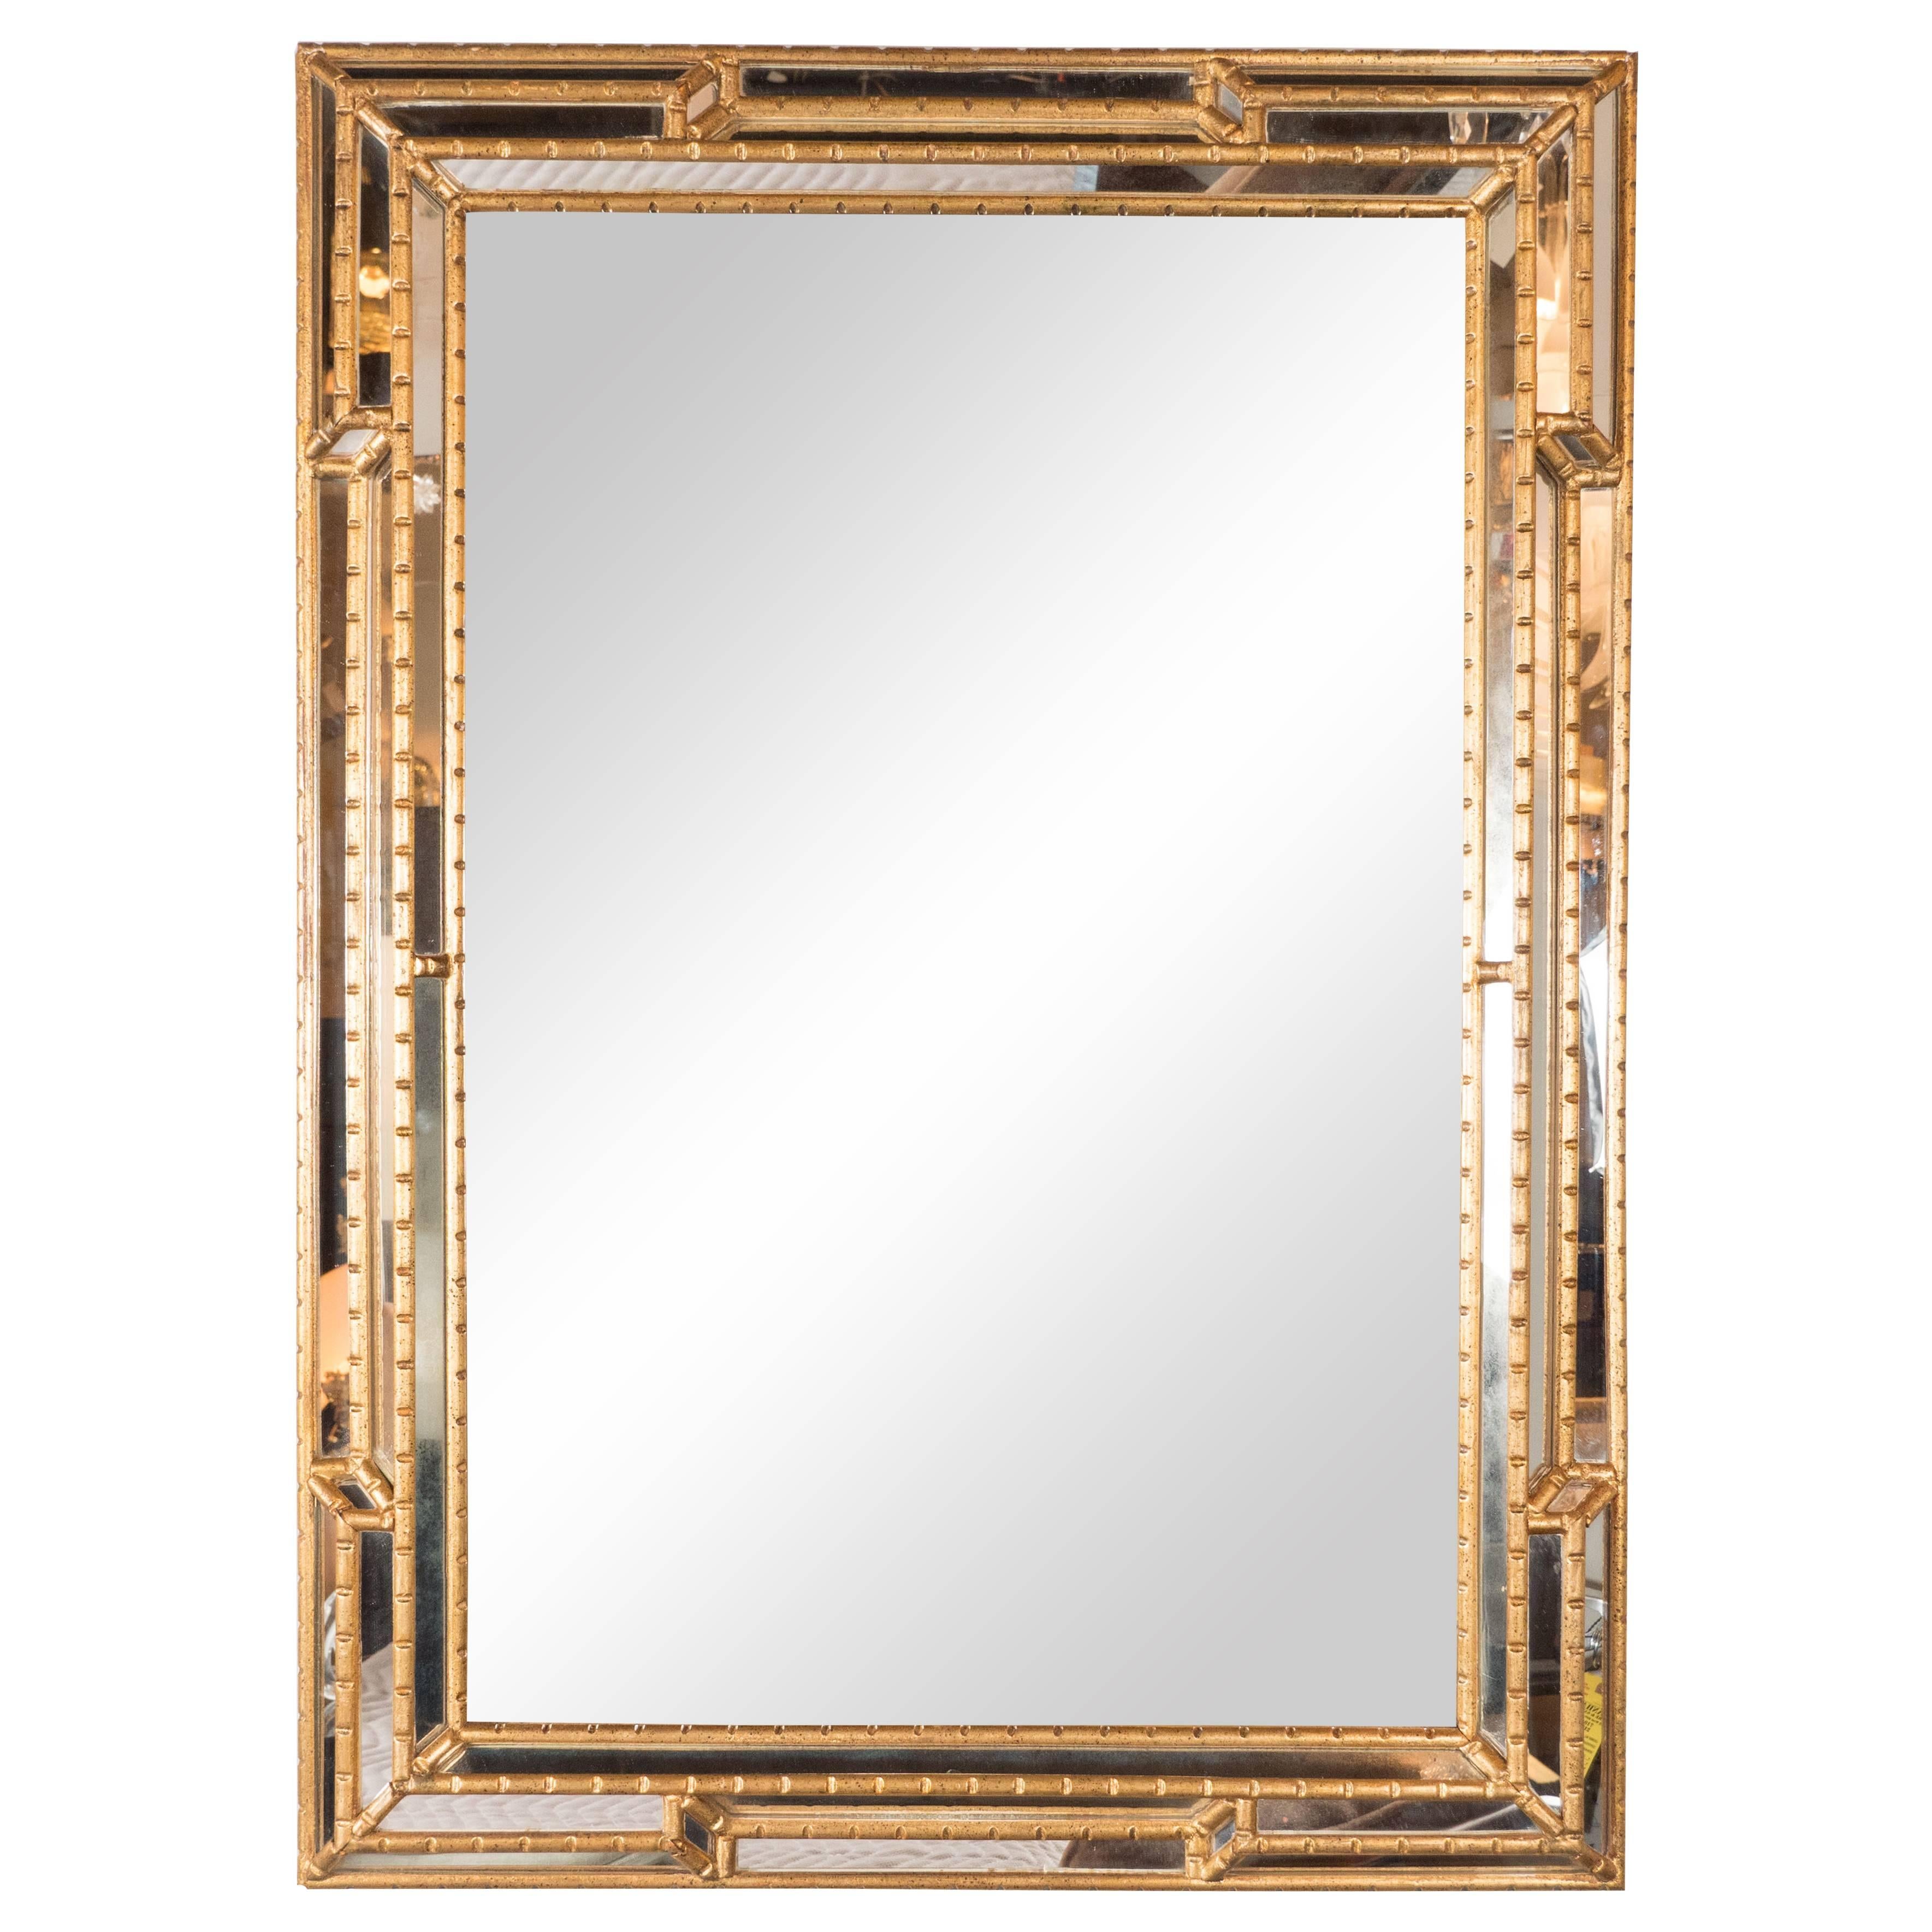 Modernist Venetian Style Mirror in Gilded Mirror with Ribbed Mosaic Border